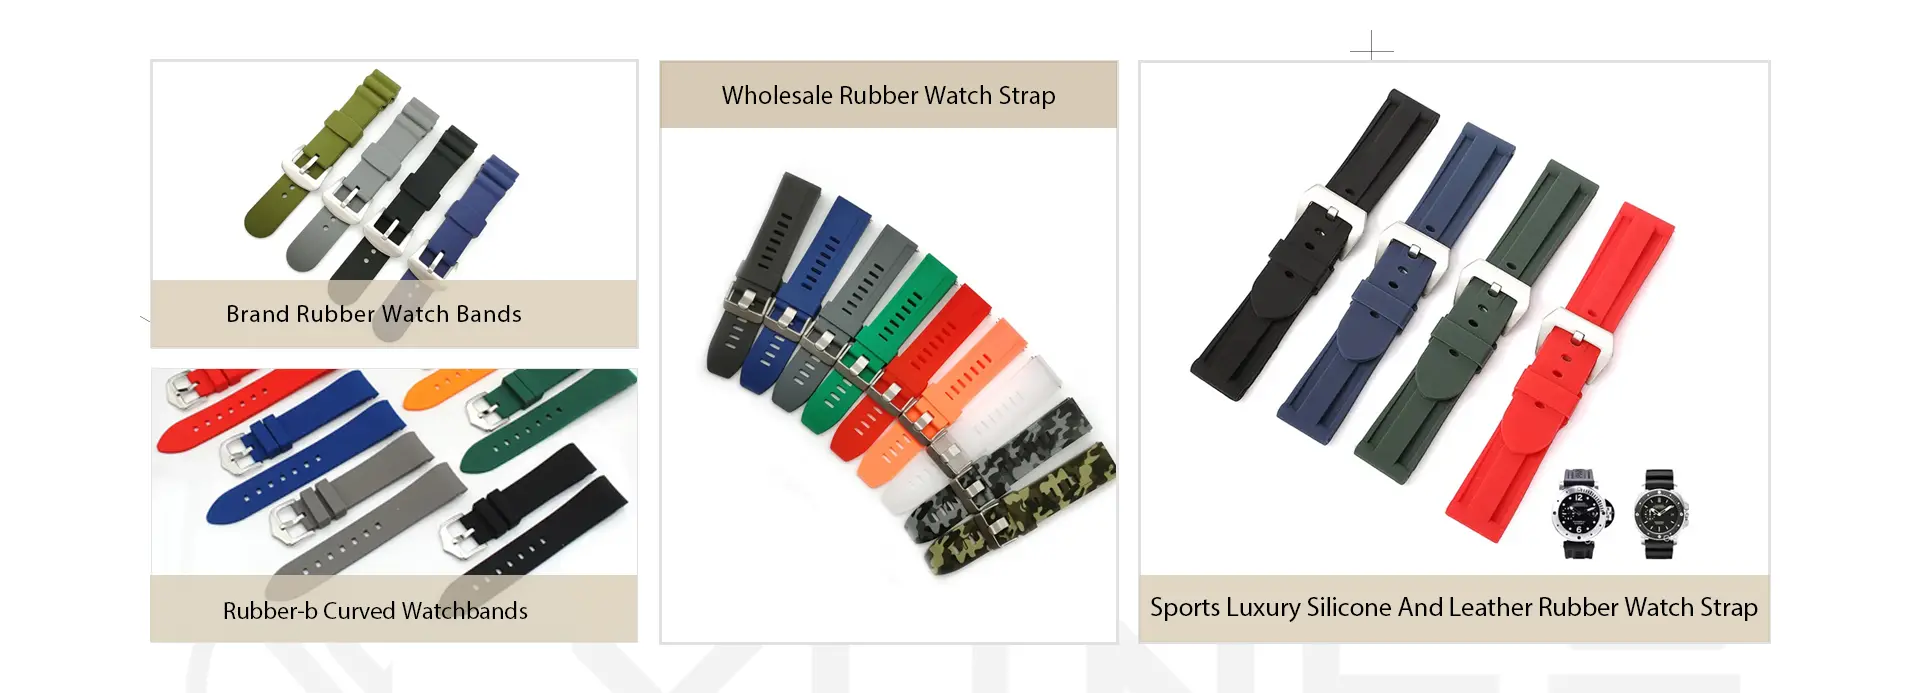 RUBBER WATCH BAND